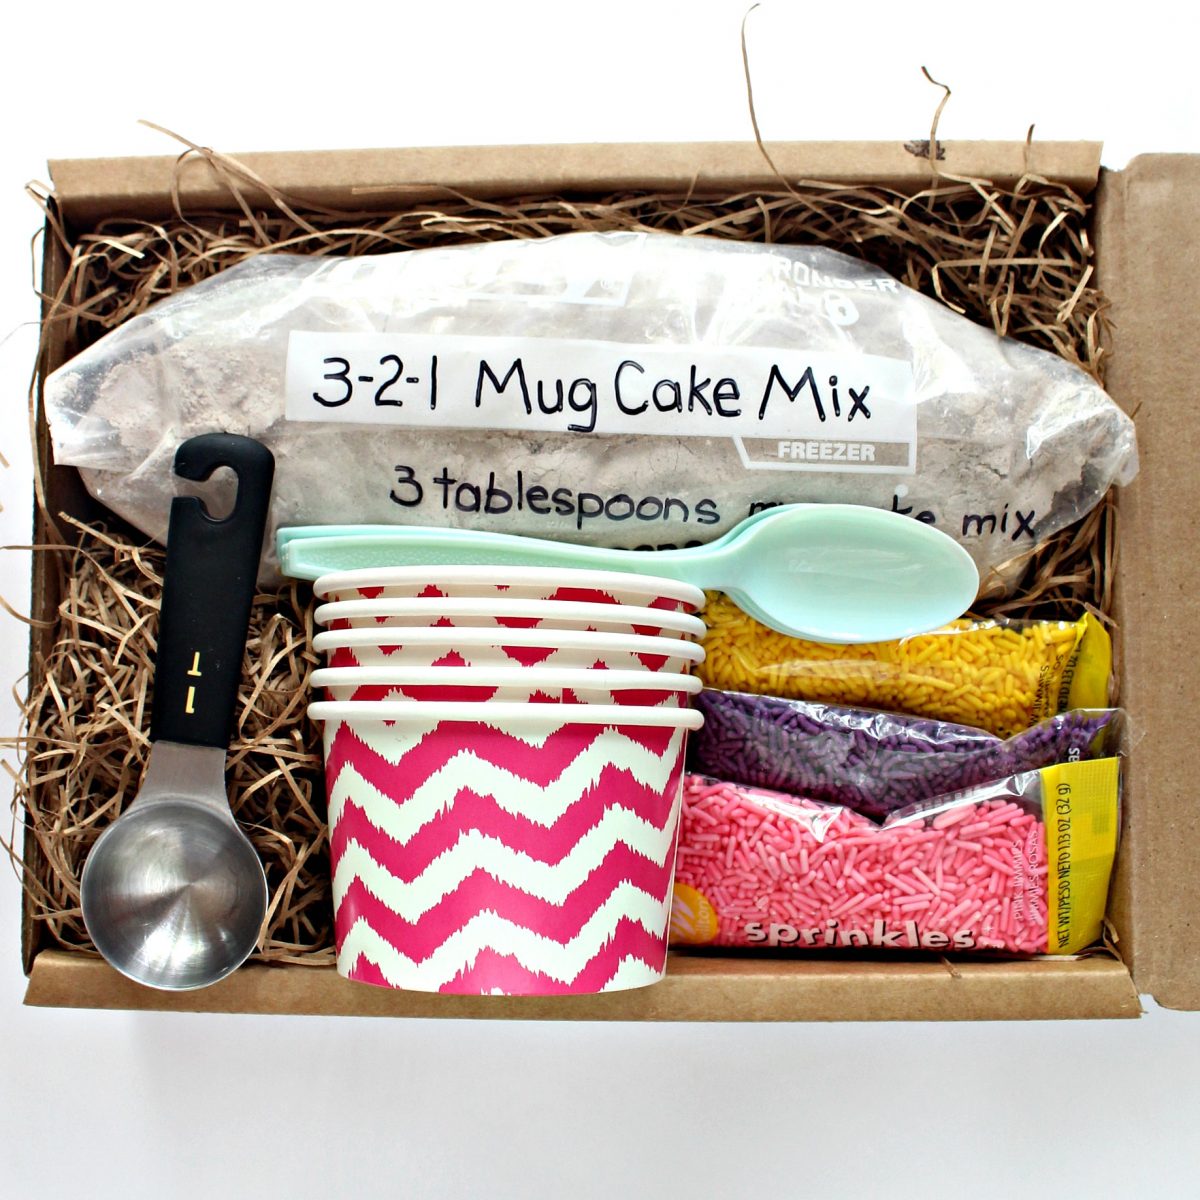 Packaged mug cake ingredients and materials 